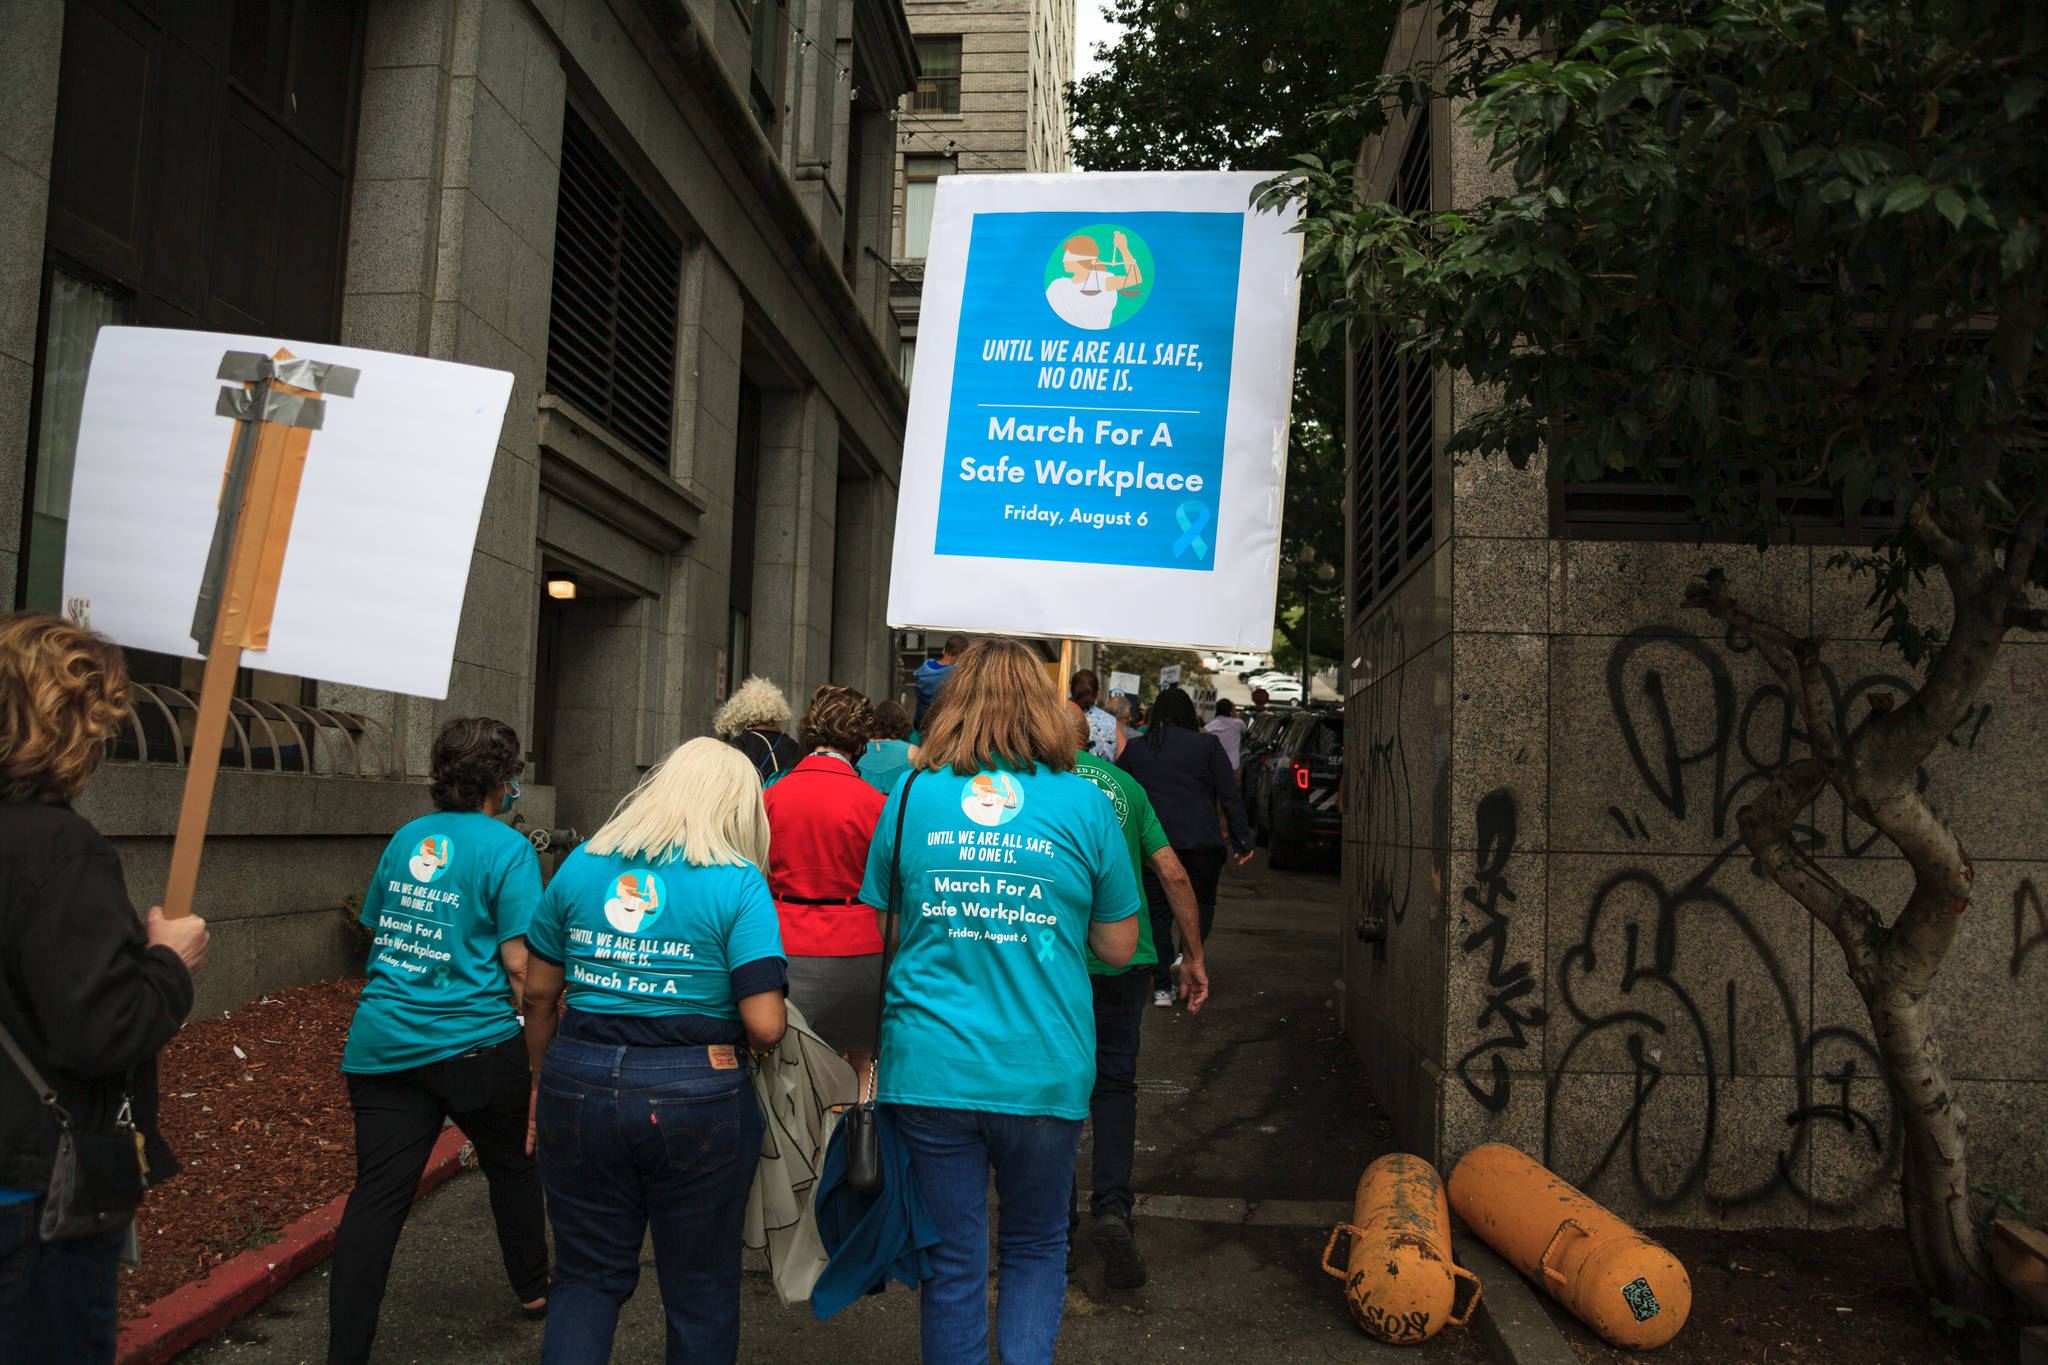 County employees and supporters walk past the King County Courthouse during a march for women’s safety at work in Seattle on Friday, Aug. 6, 2021. The march was scheduled after a woman was attacked in a bathroom at the King County Courthouse. Photo by Henry Stewart-Wood/Sound Publishing